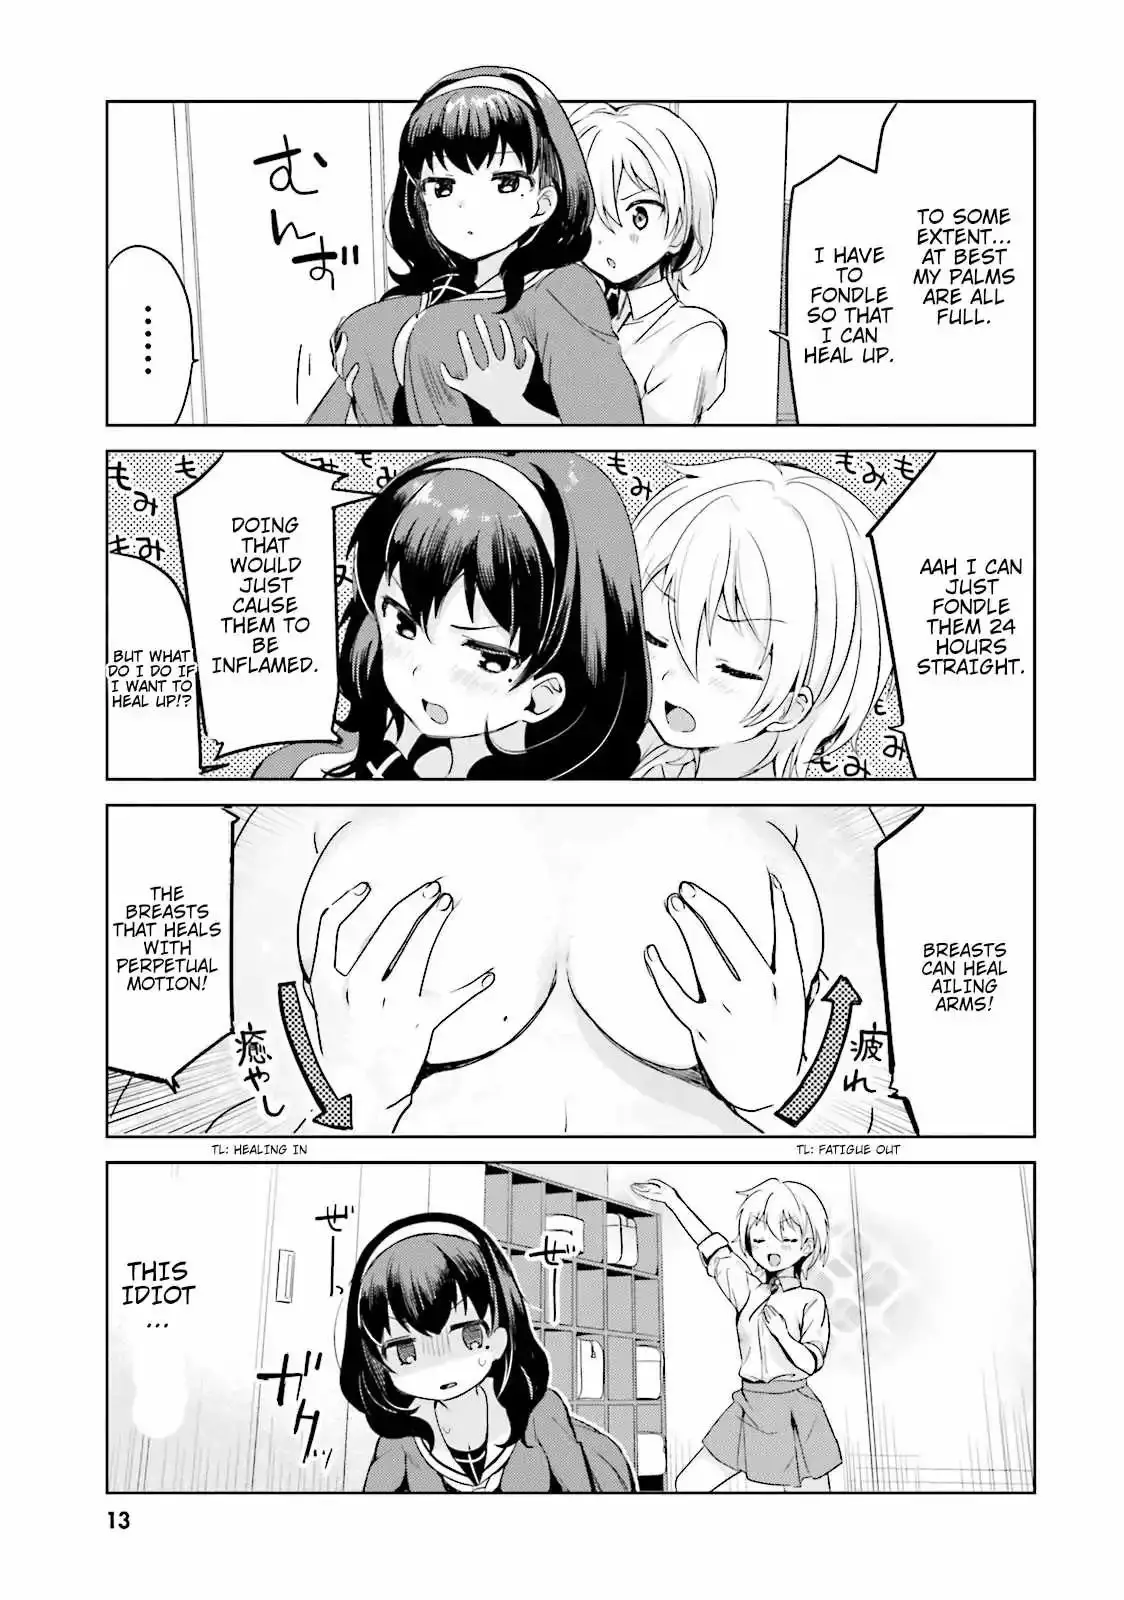 I Like Oppai Best In The World! - 0 page 15